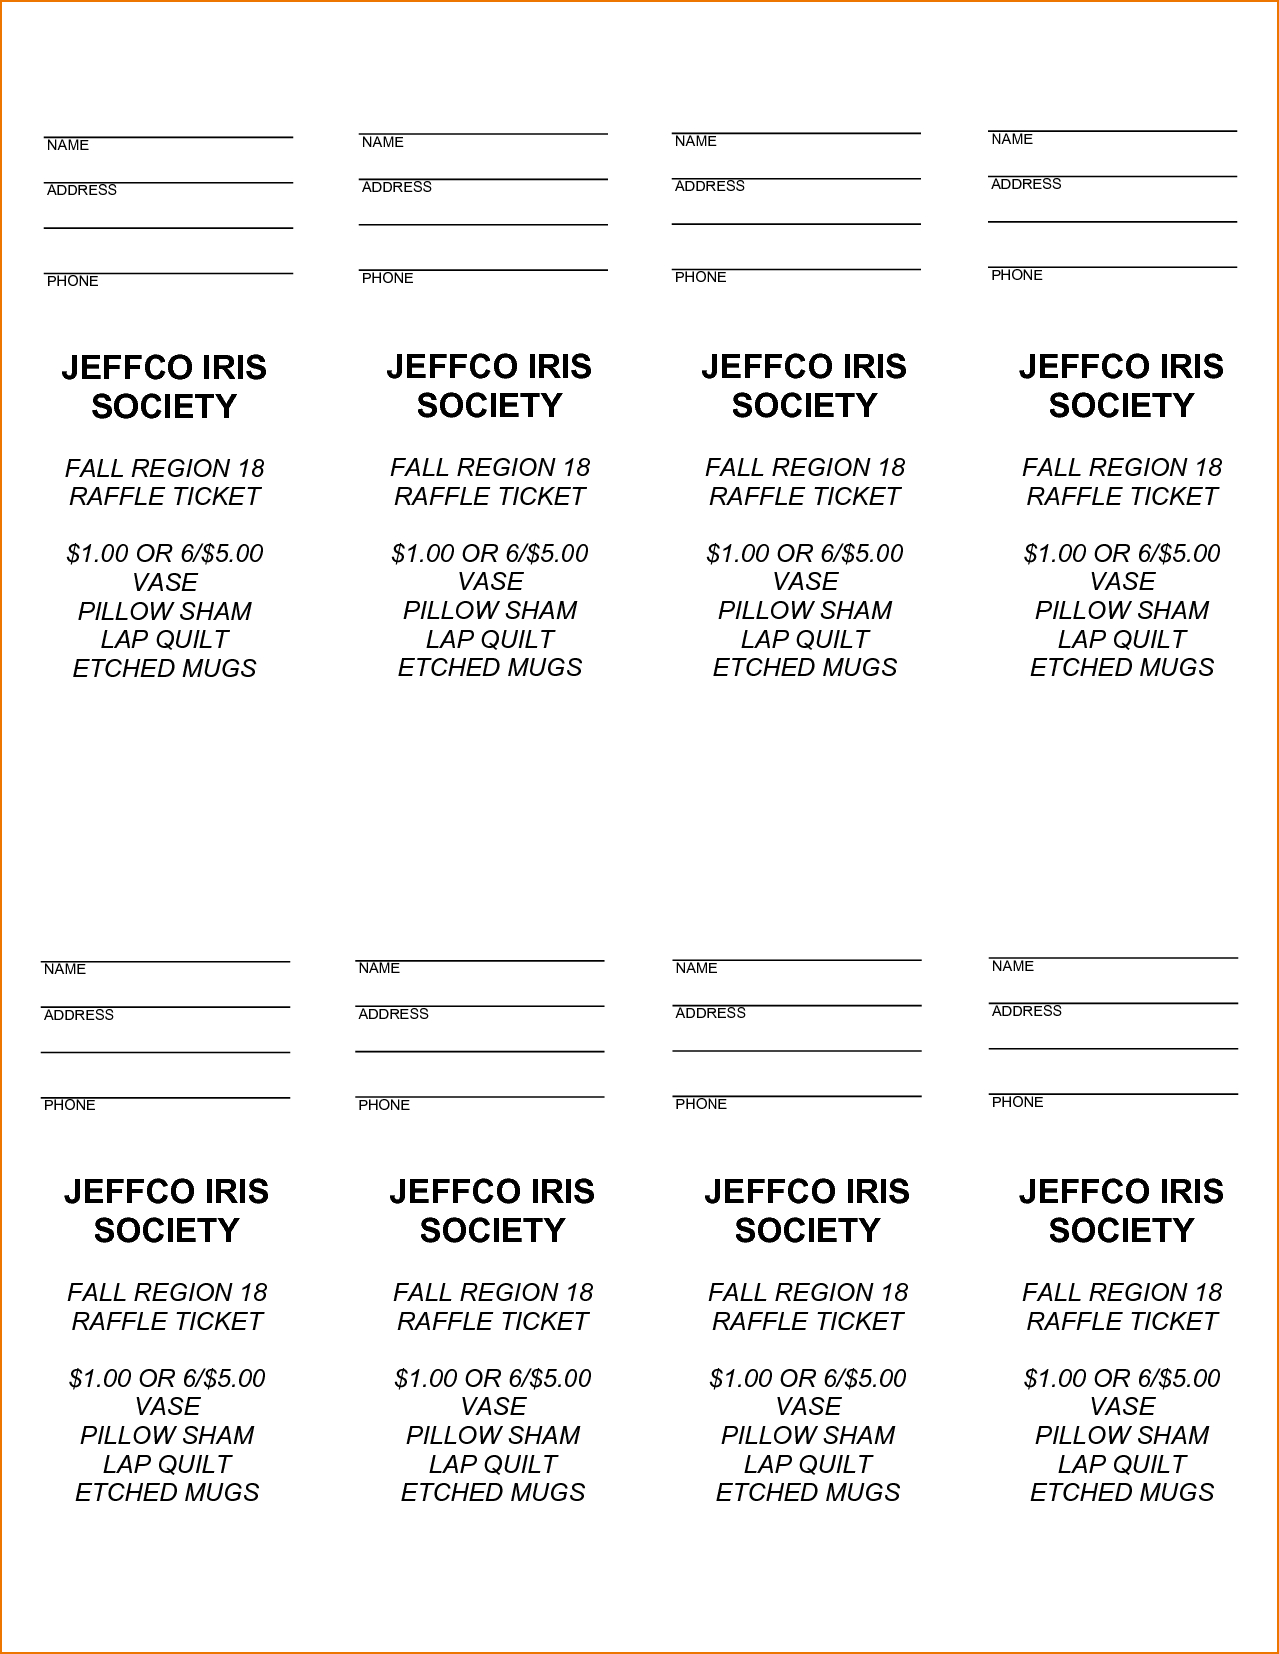 Free Printable Raffle Tickets With Stubs - Free Download - Free Printable Raffle Tickets With Stubs